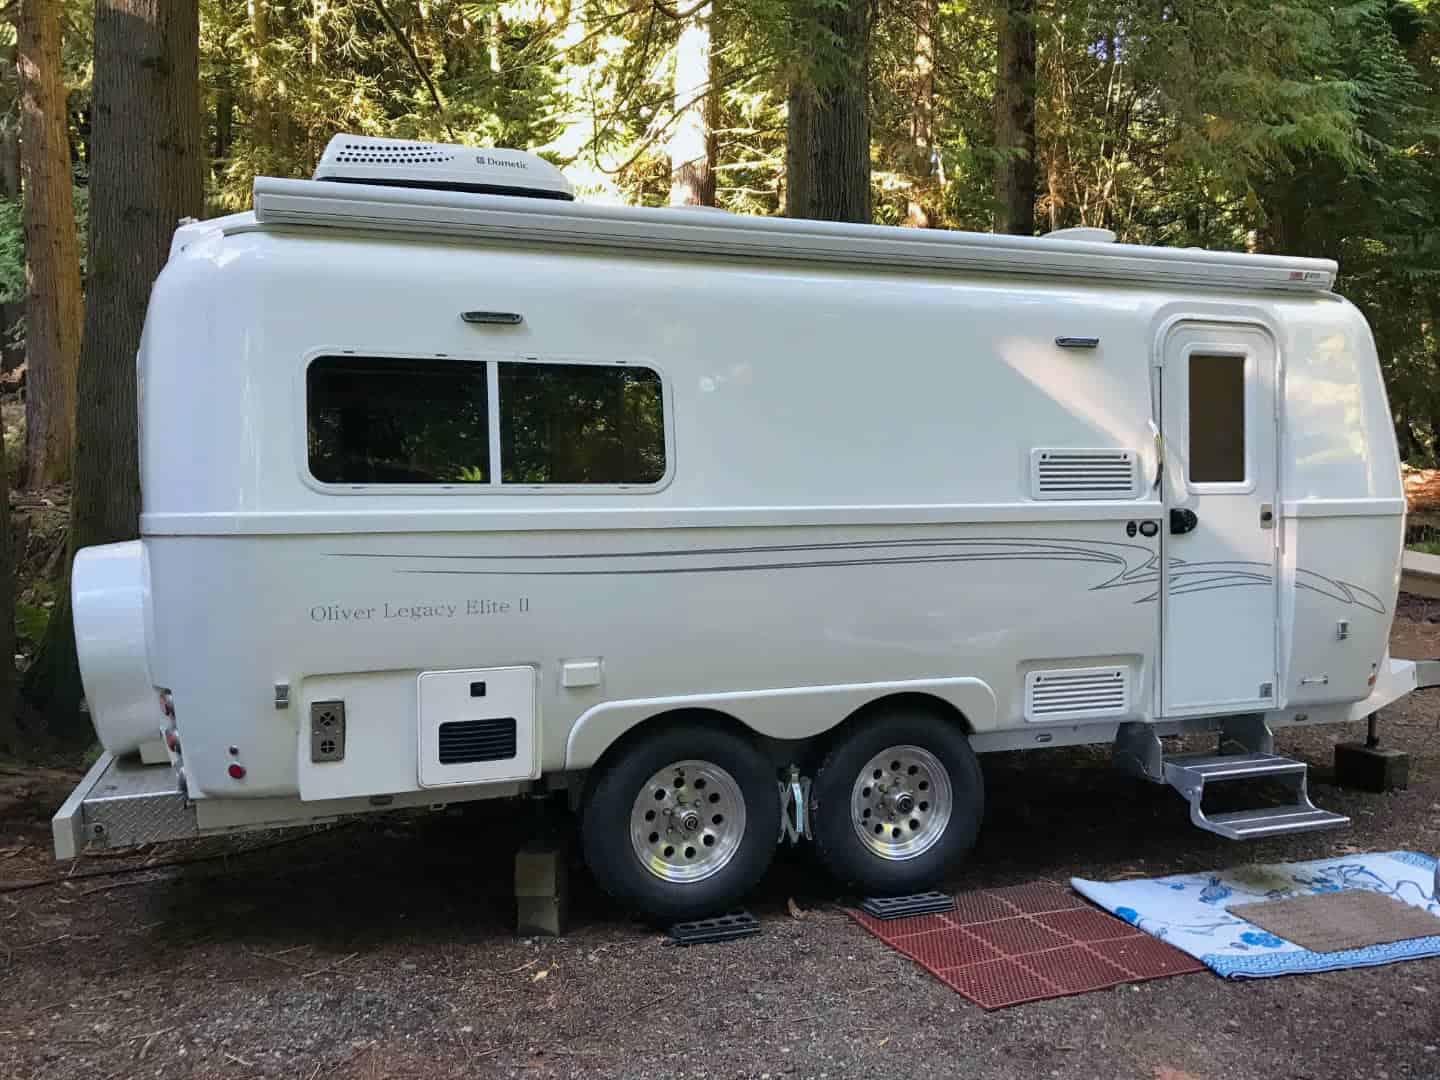 TRUE 4 Season Fifth Wheel Campers Meant For Cold Camping